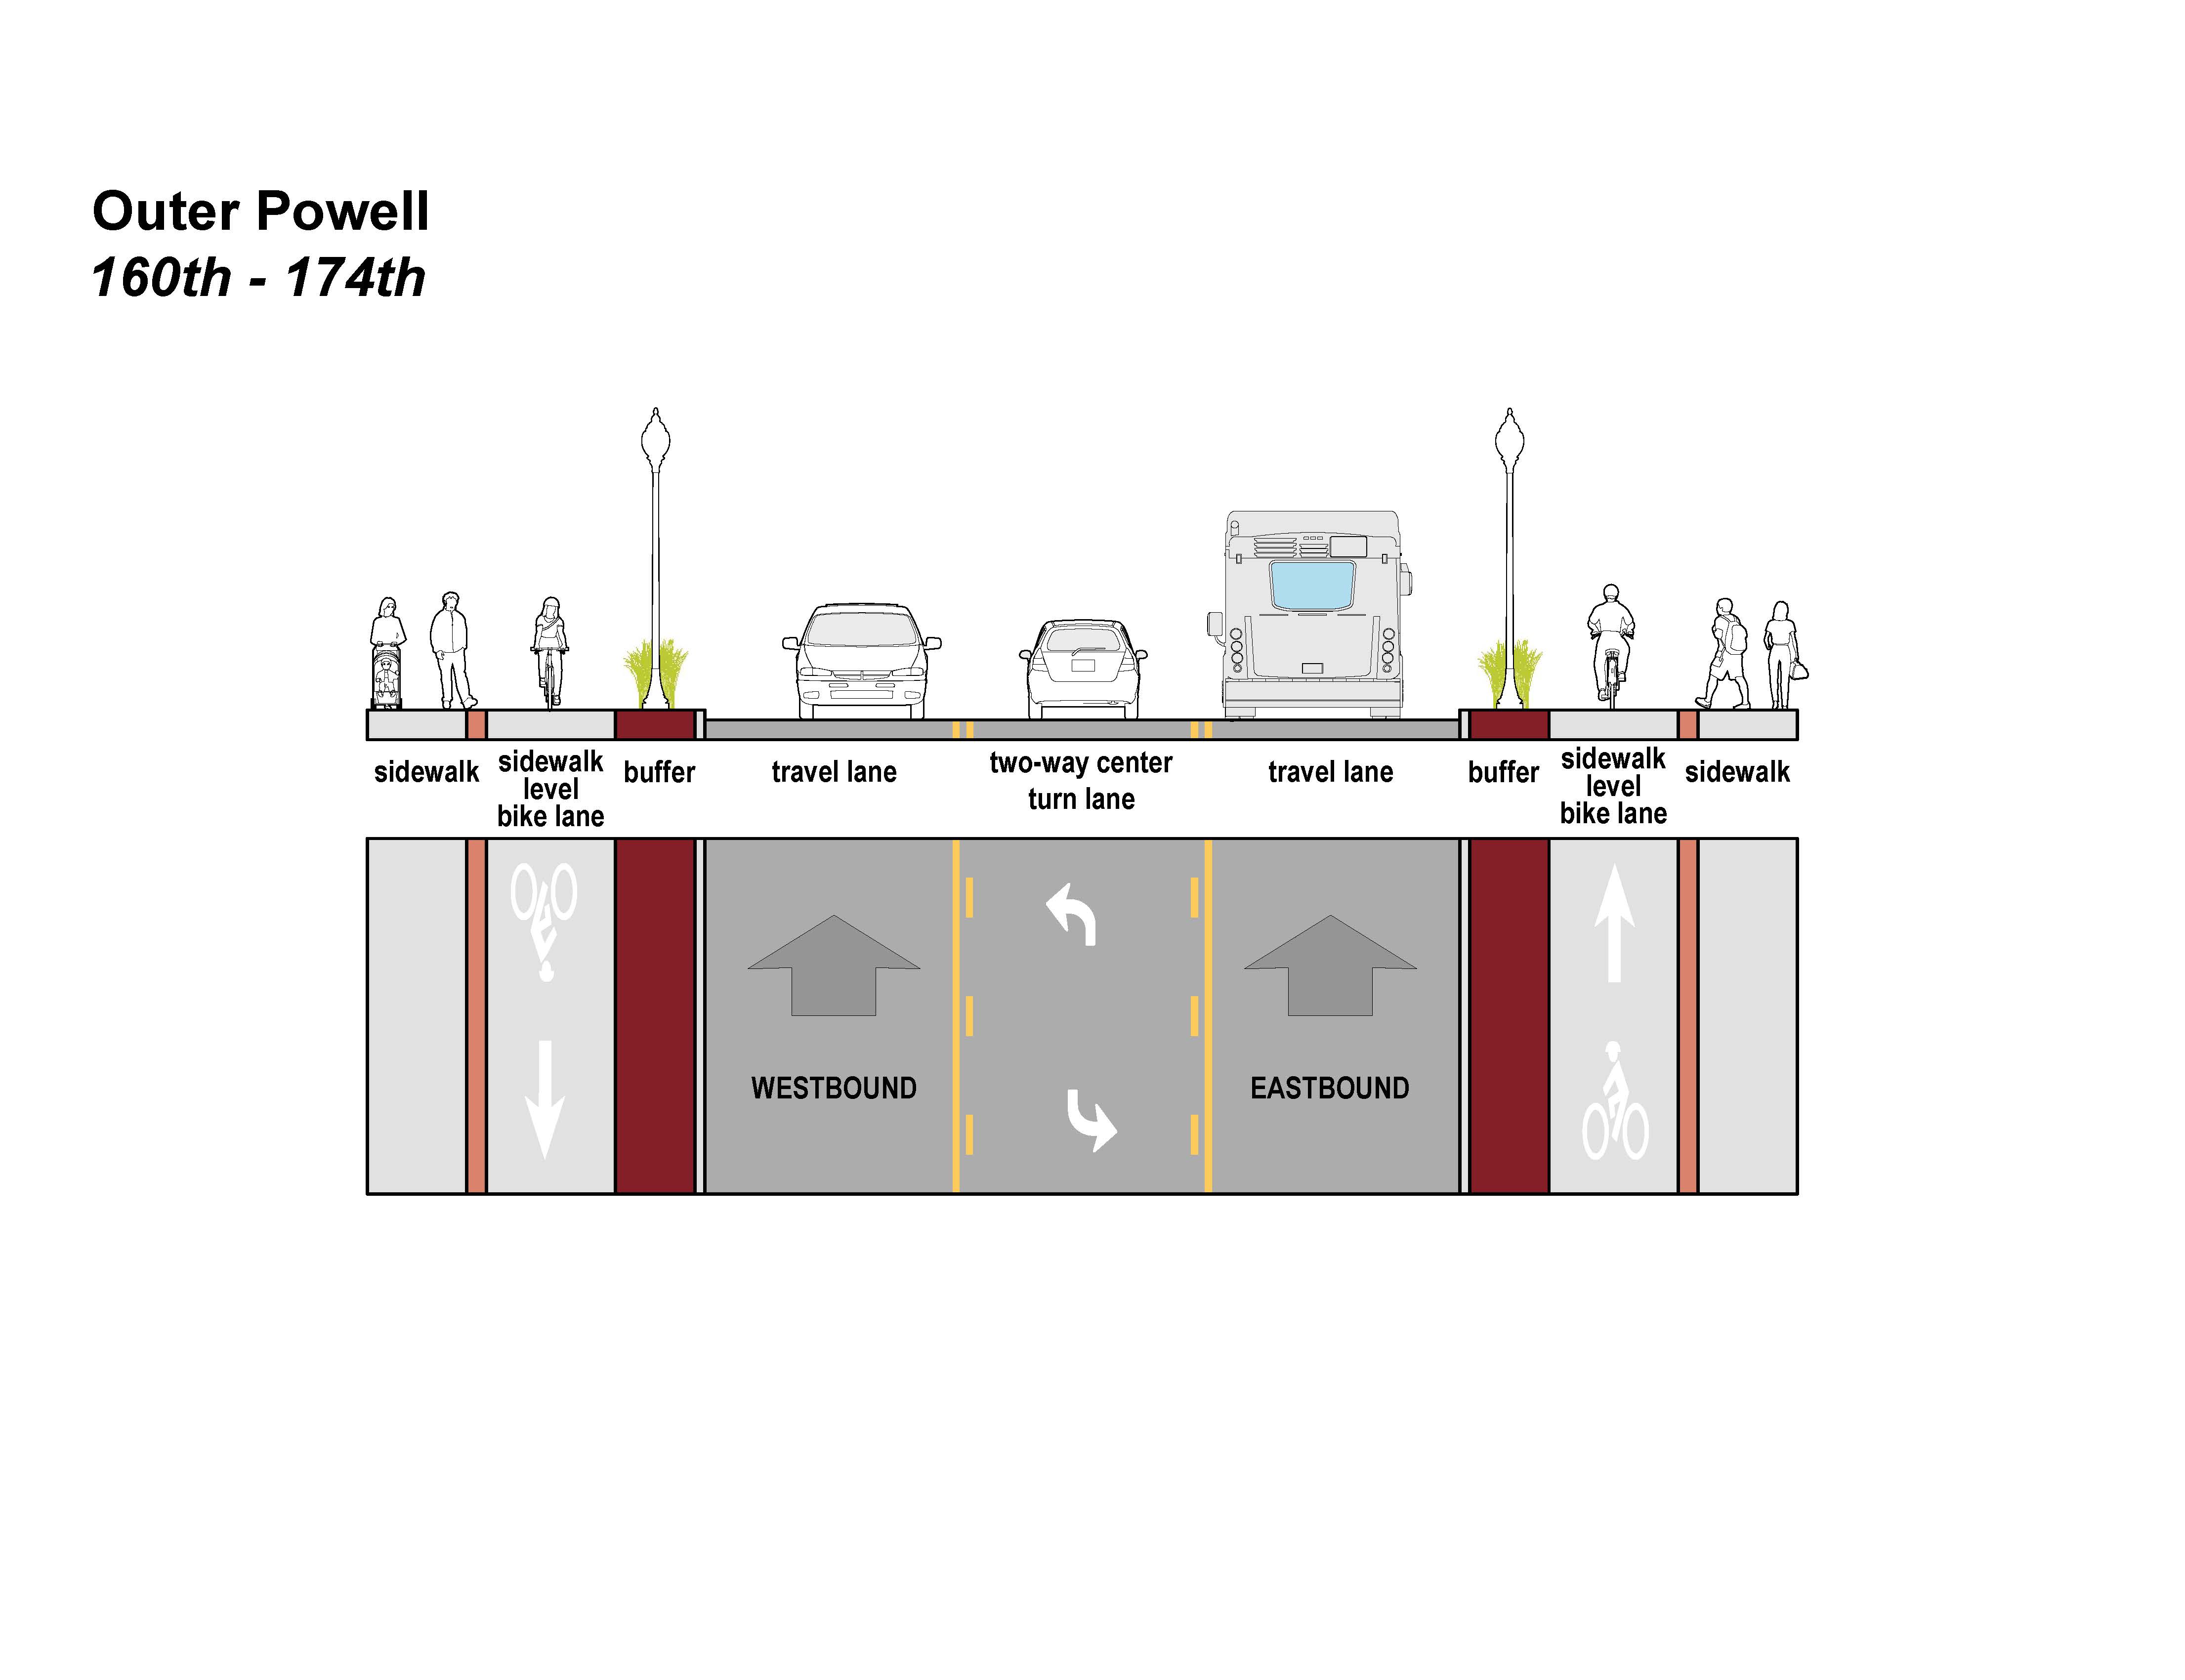 Cross-section graphic of SE Powell Boulevard from 160th avenue to 174 avenue